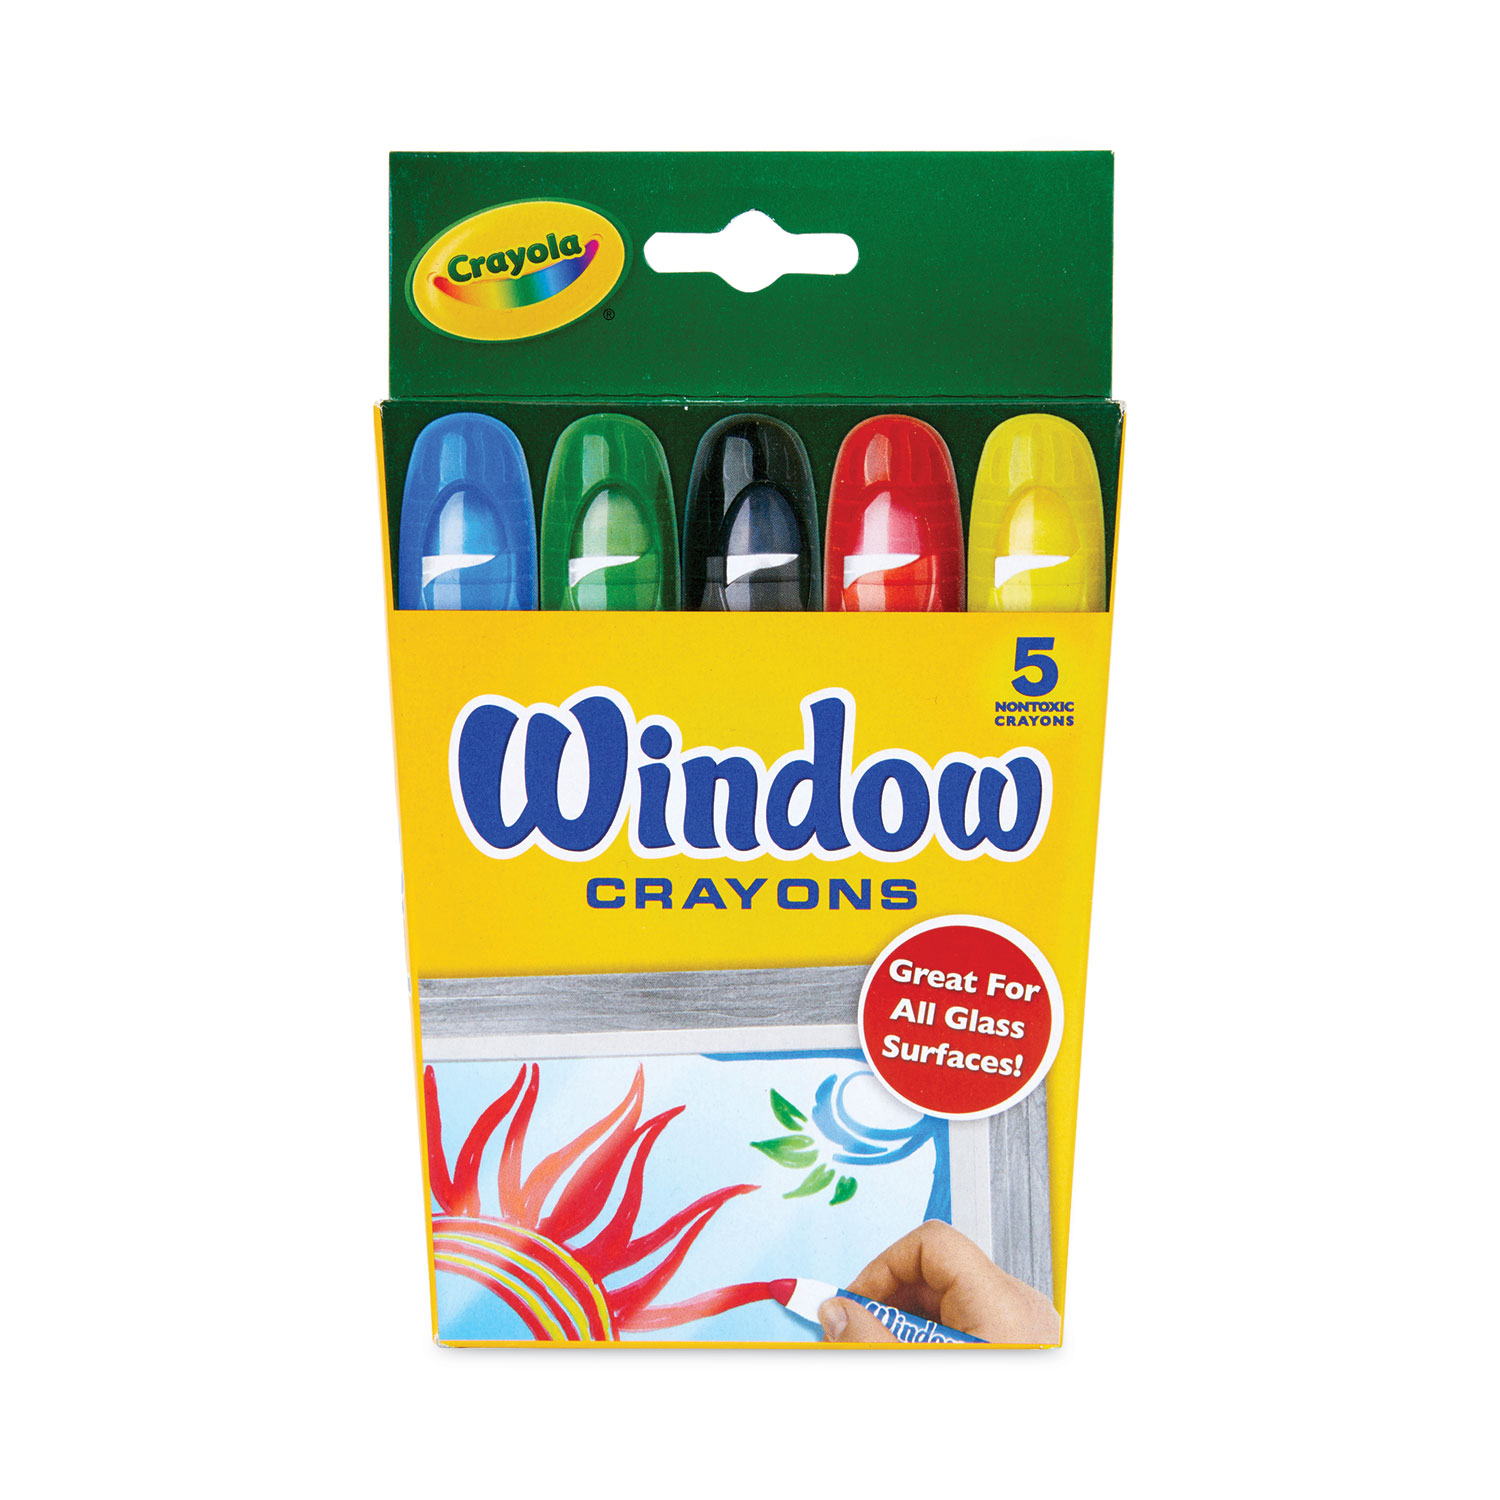 Crayola Mini Twistable Crayons 24 in A Box (Pack of 4) 96 Crayons in Total